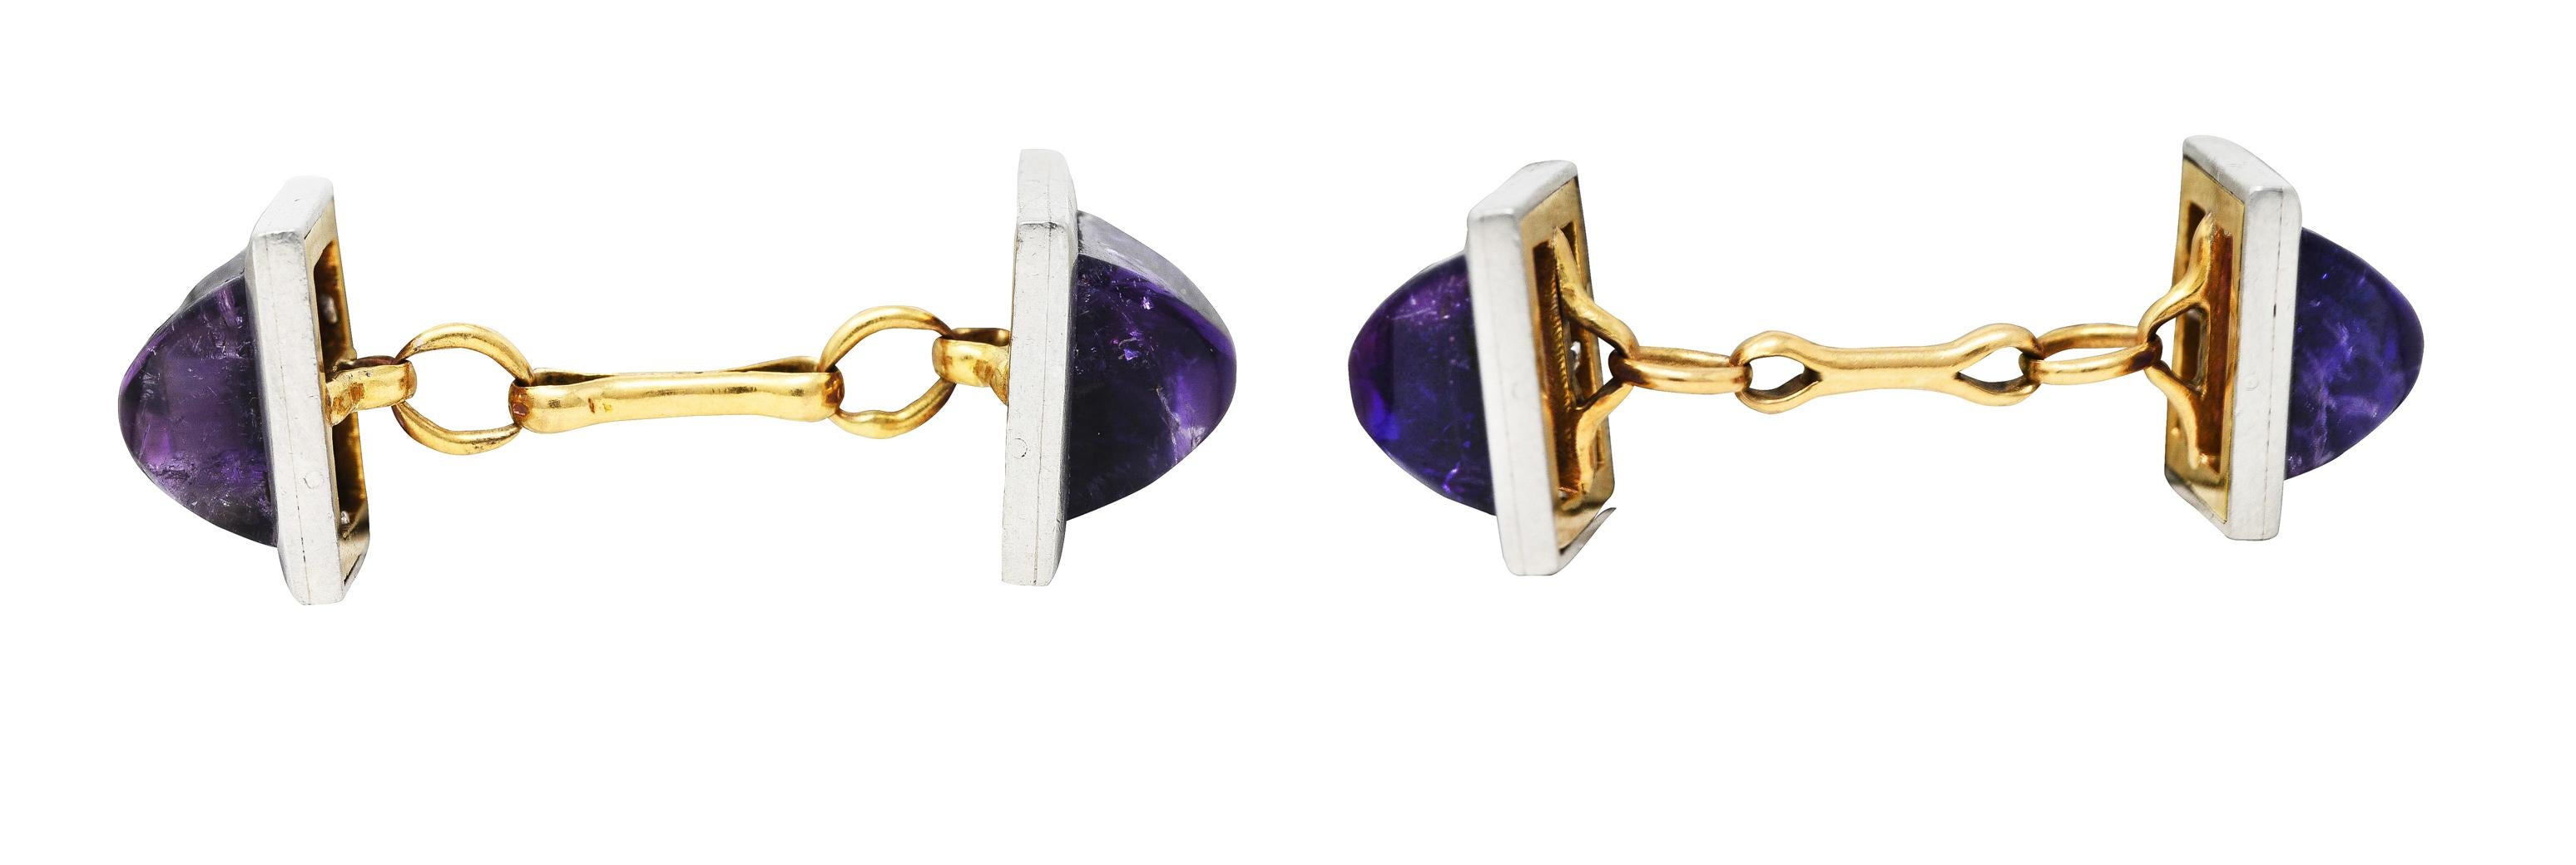 Link style cufflinks terminate as 11.5 mm square forms. Each centering an 8.5 mm highly domed sugarloaf cabochon of amethyst. Richly purple in color and translucent with natural inclusions. Surrounded by a platinum frame backed by yellow gold.